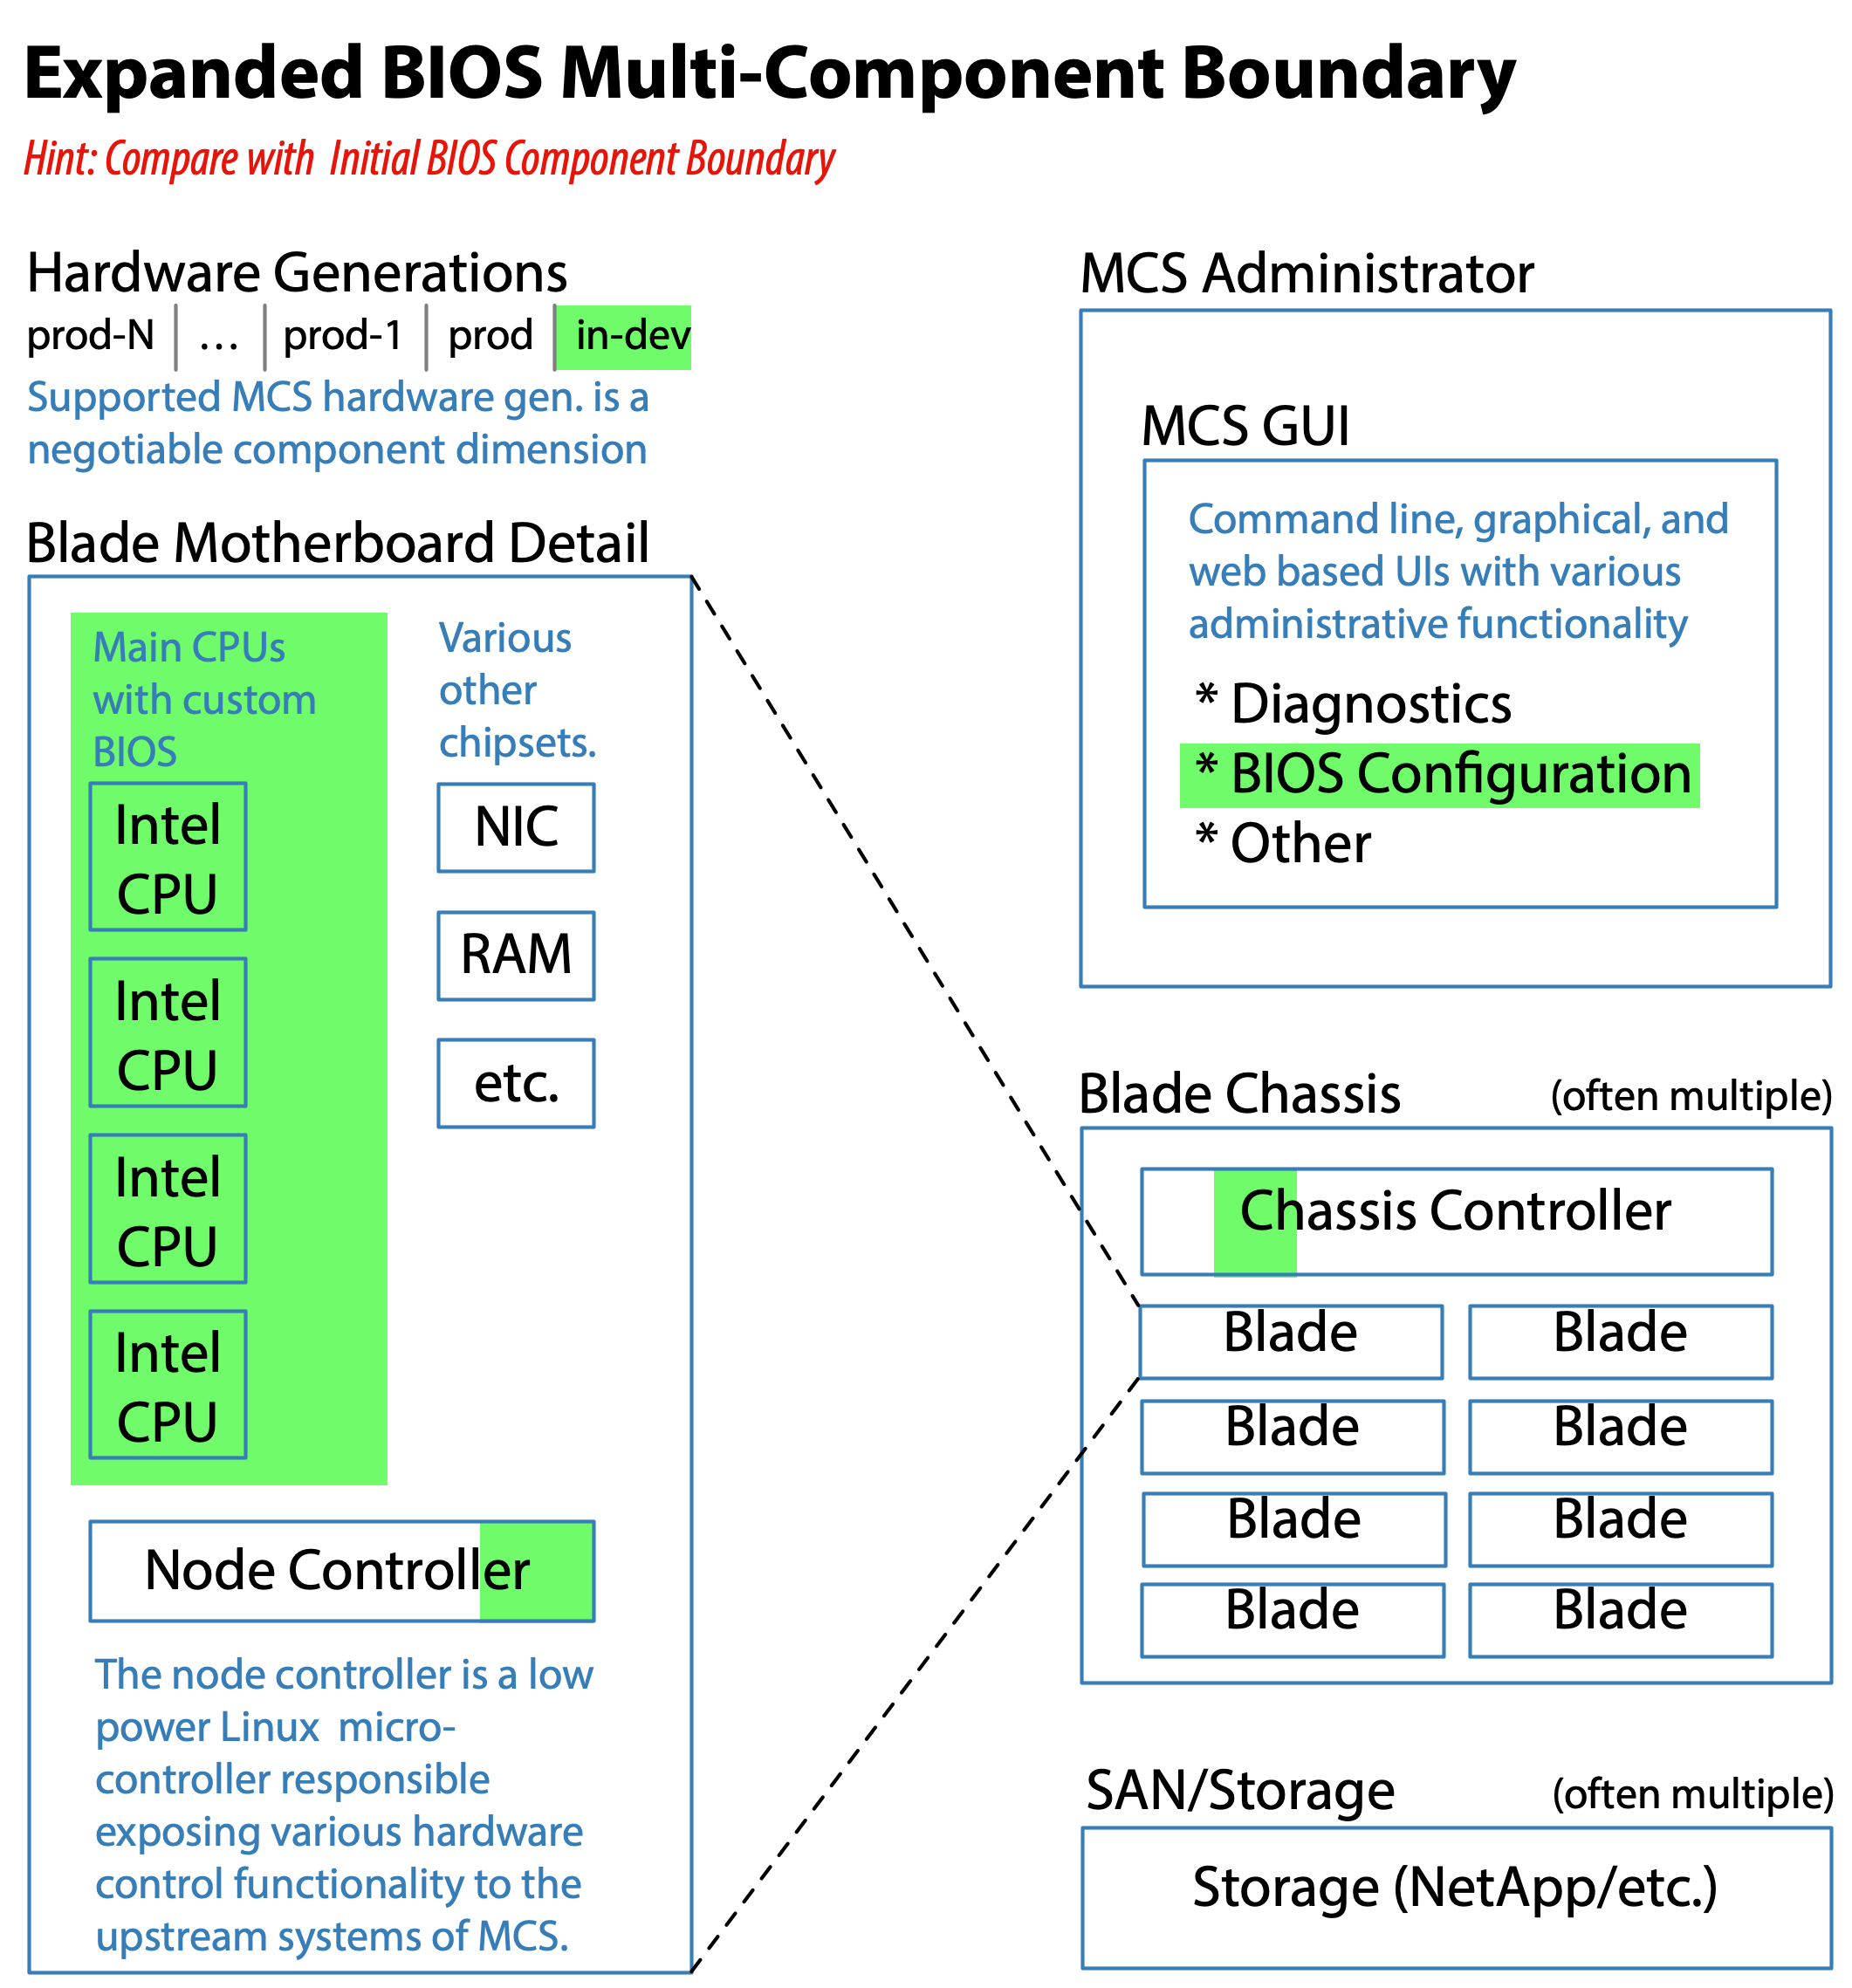 Expanded BIOS Multi-Component Boundary